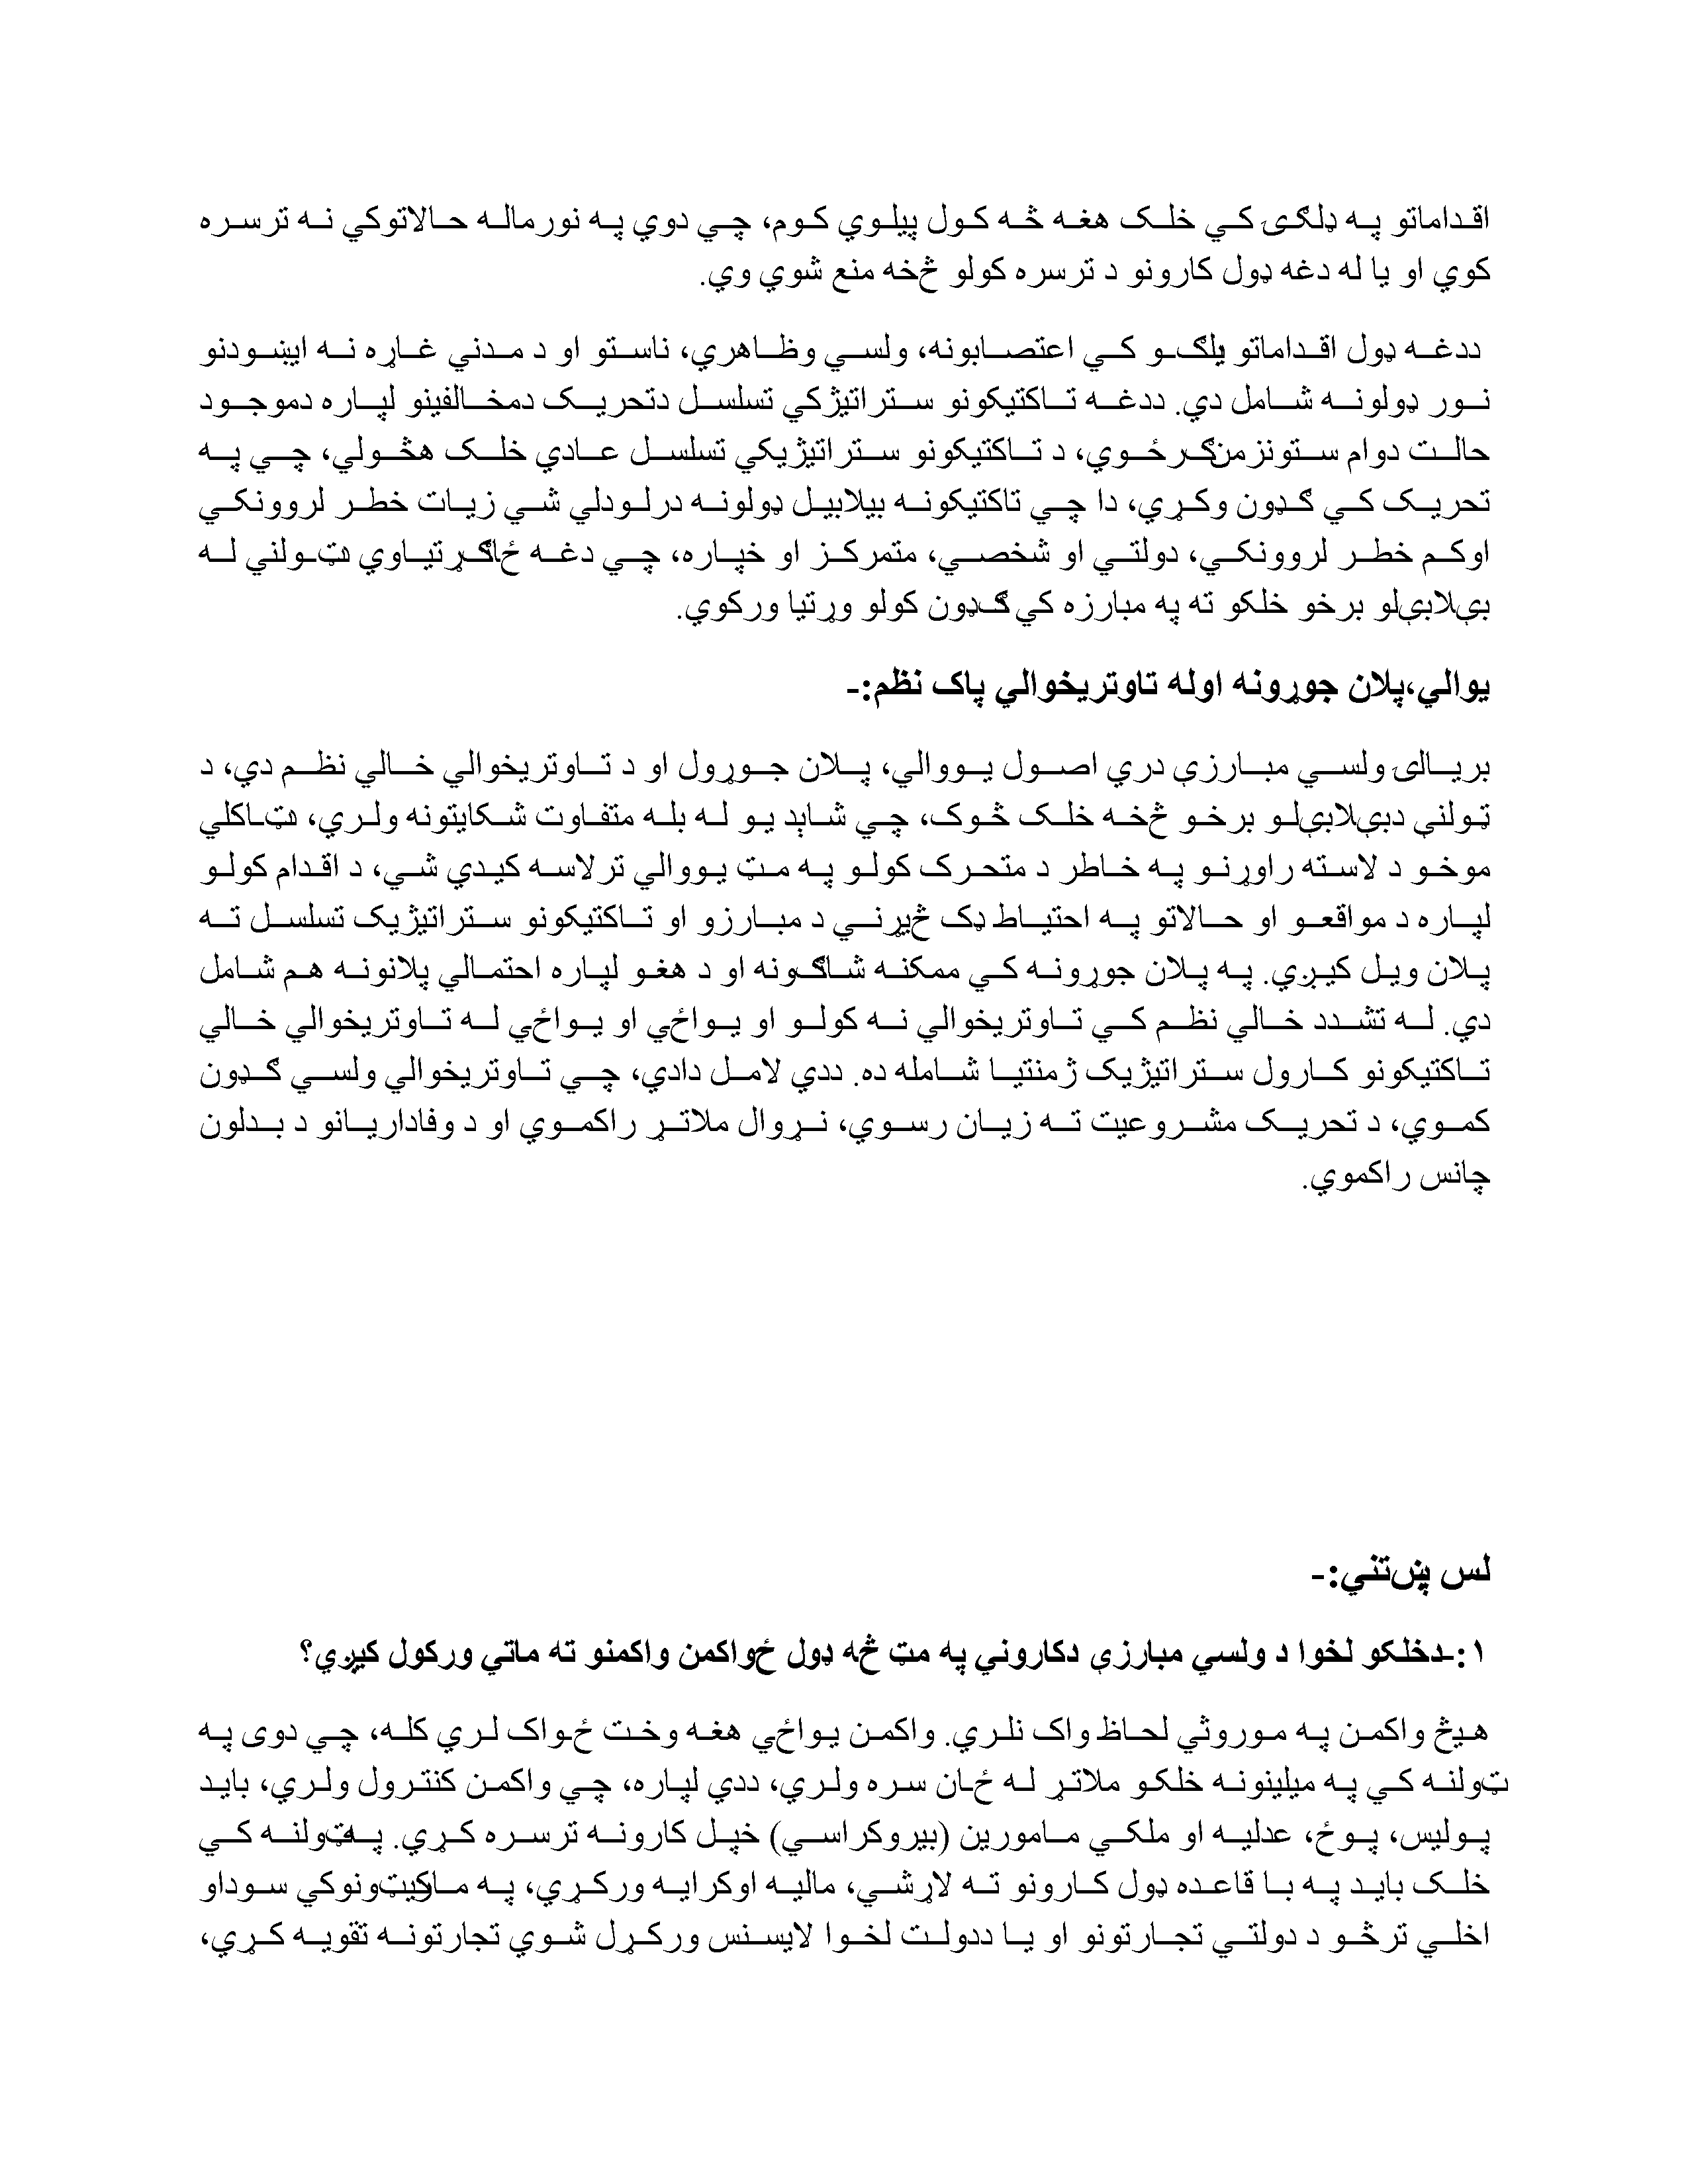 Civil Resistance: A First Look (booklet) (Pashto)